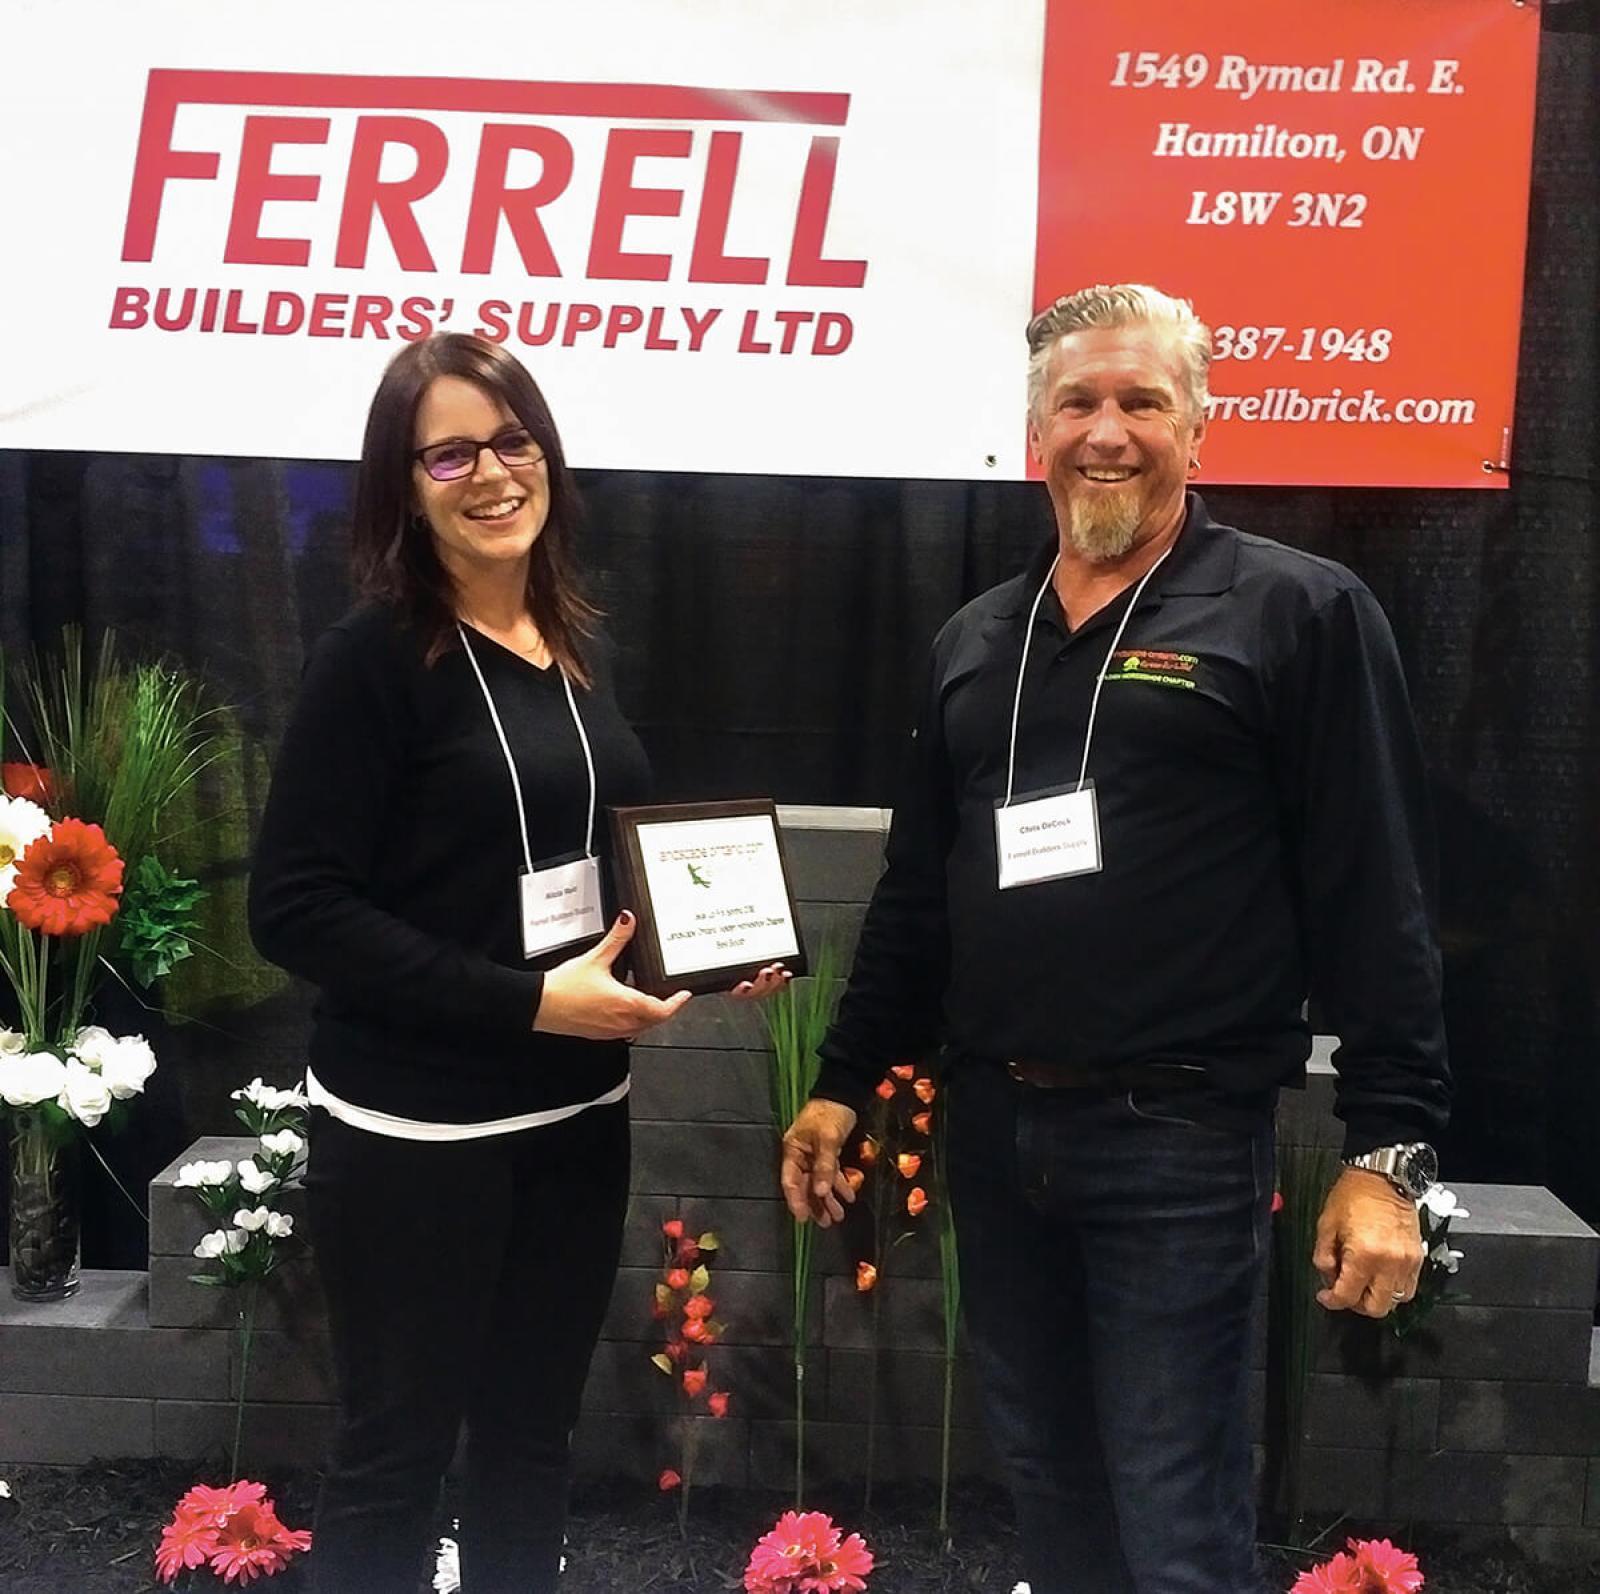 Alicia Reid and Chris DeCock from Ferrell Builders’ Supply accept the best booth award.